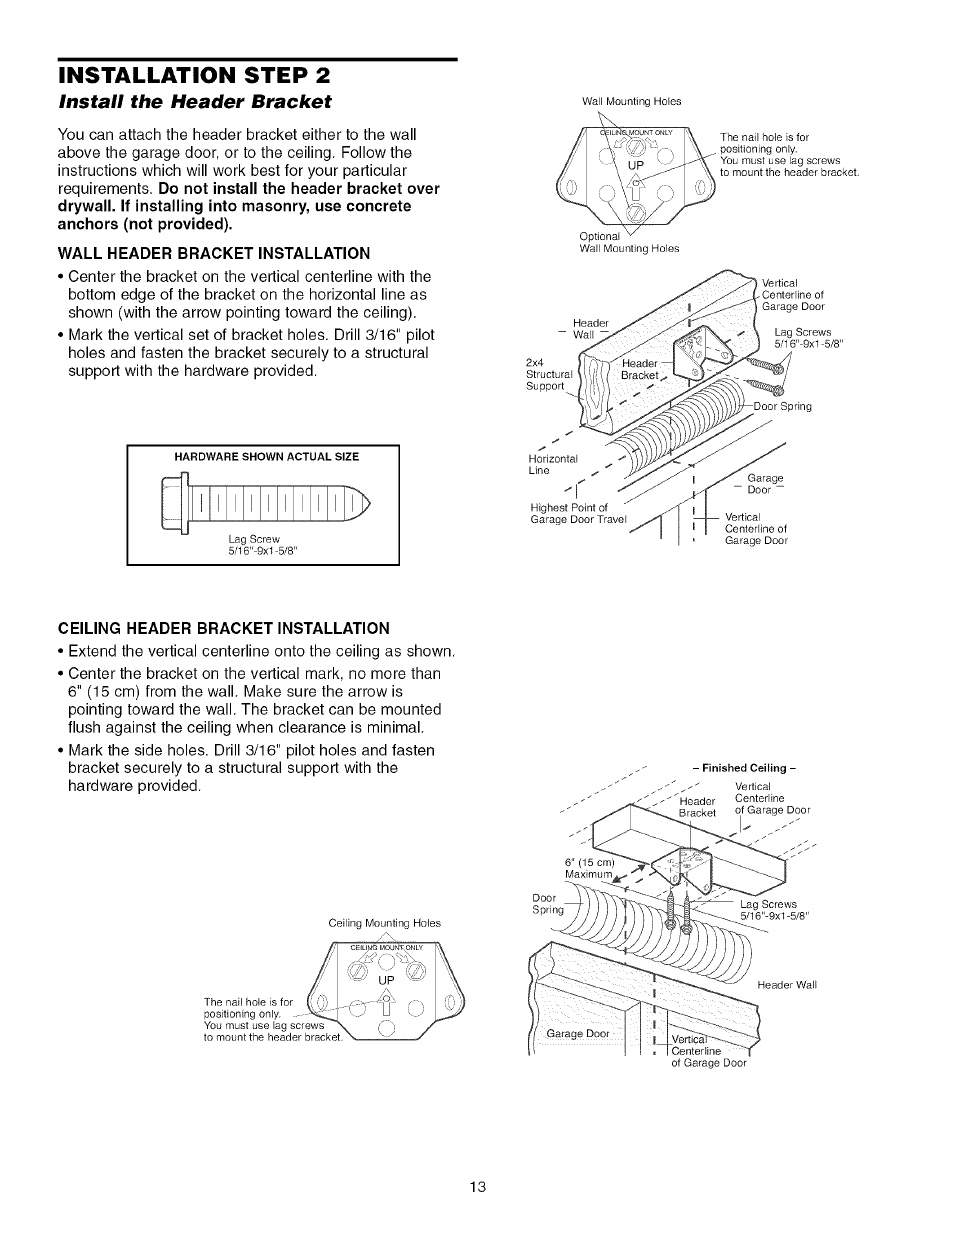 Wall header bracket installation, Ceiling header bracket installation, Installation step 2 | Craftsman 139.53993D User Manual | Page 13 / 76